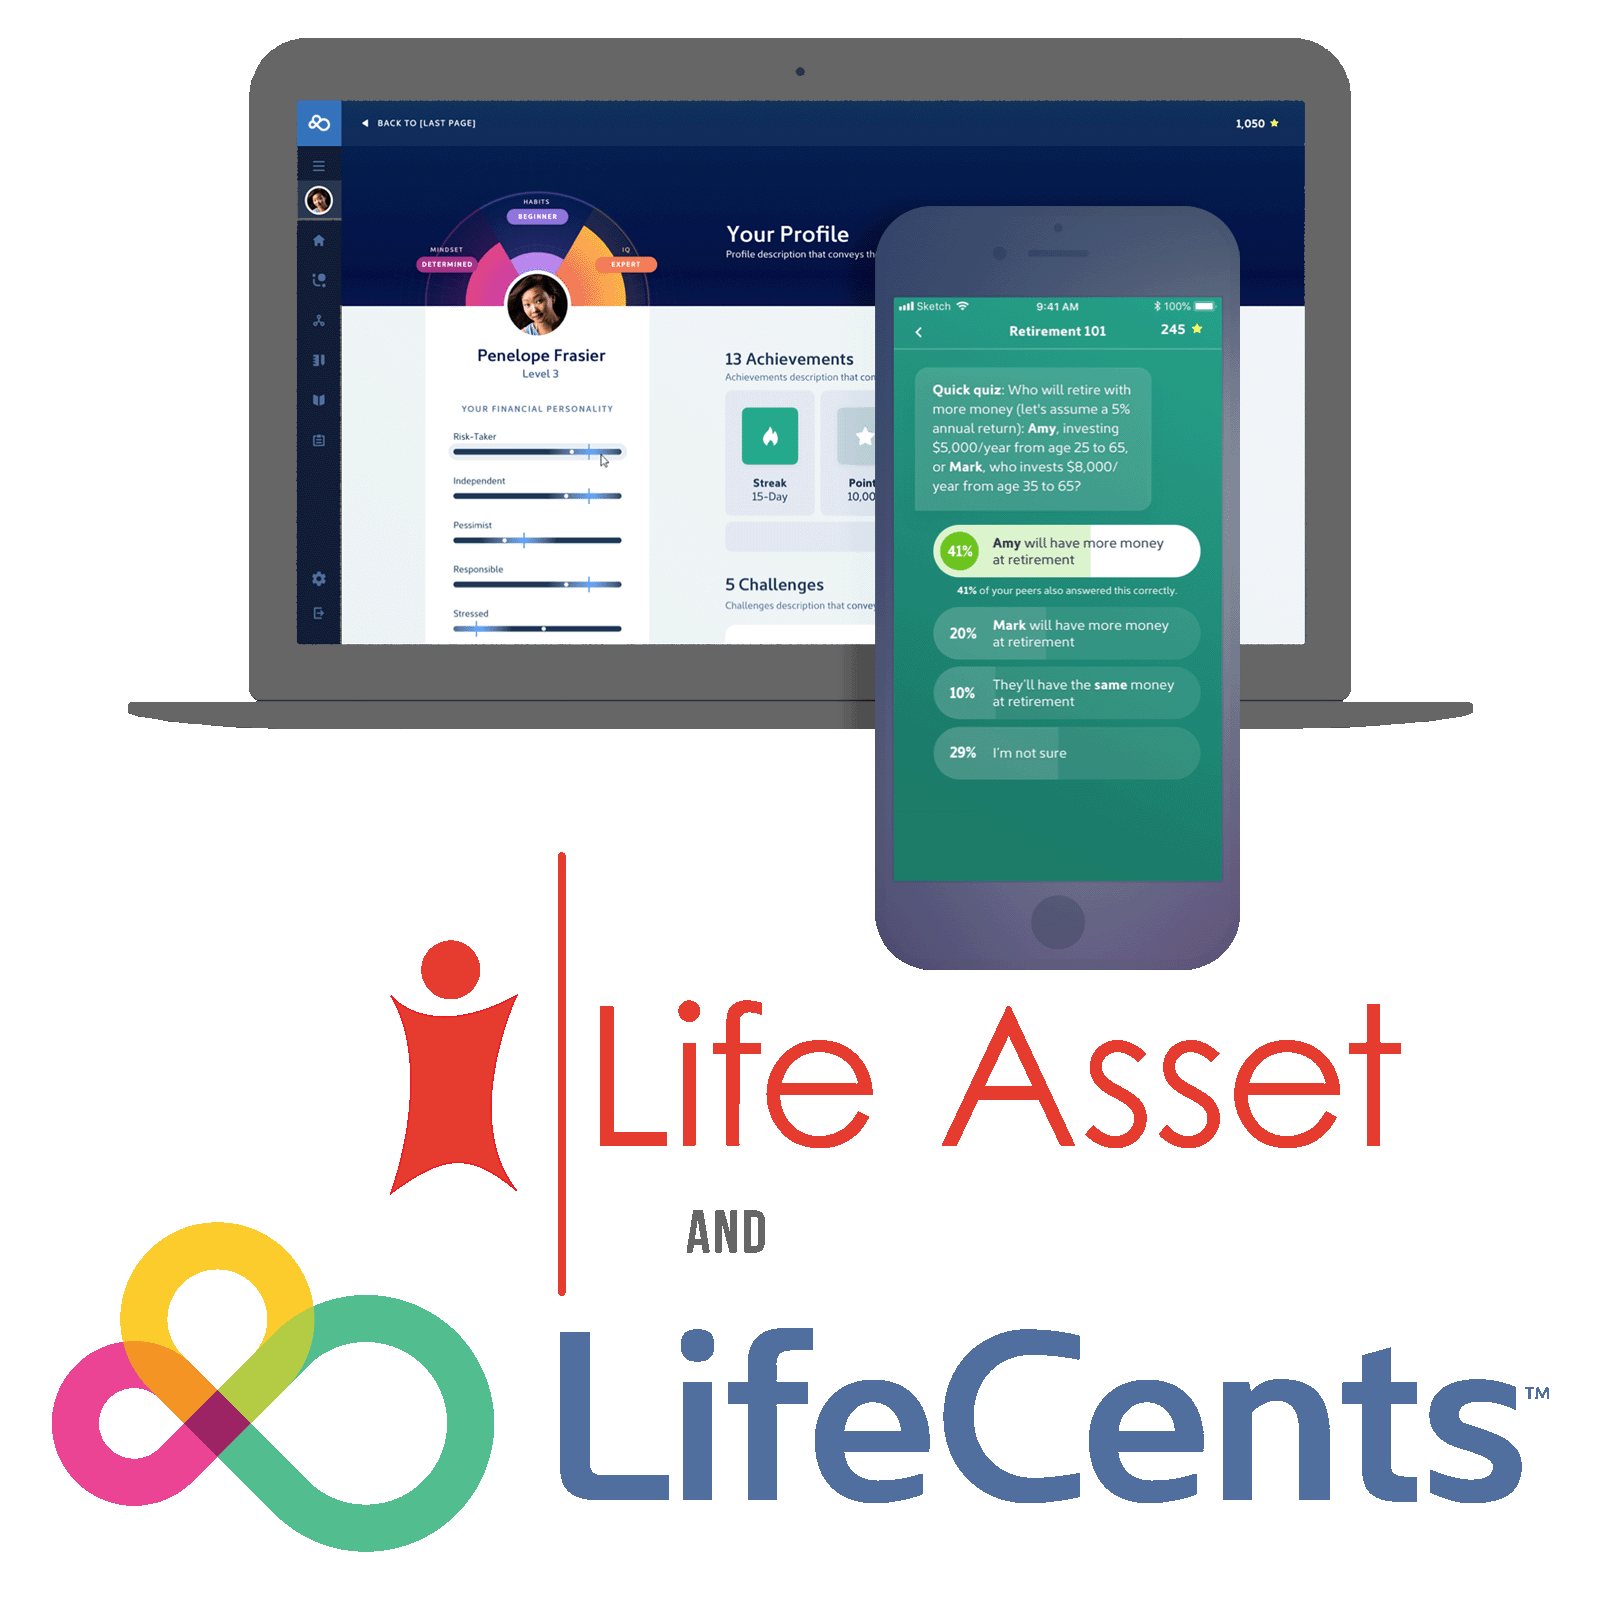 A laptop and a phone both show screens from the LifeCents website